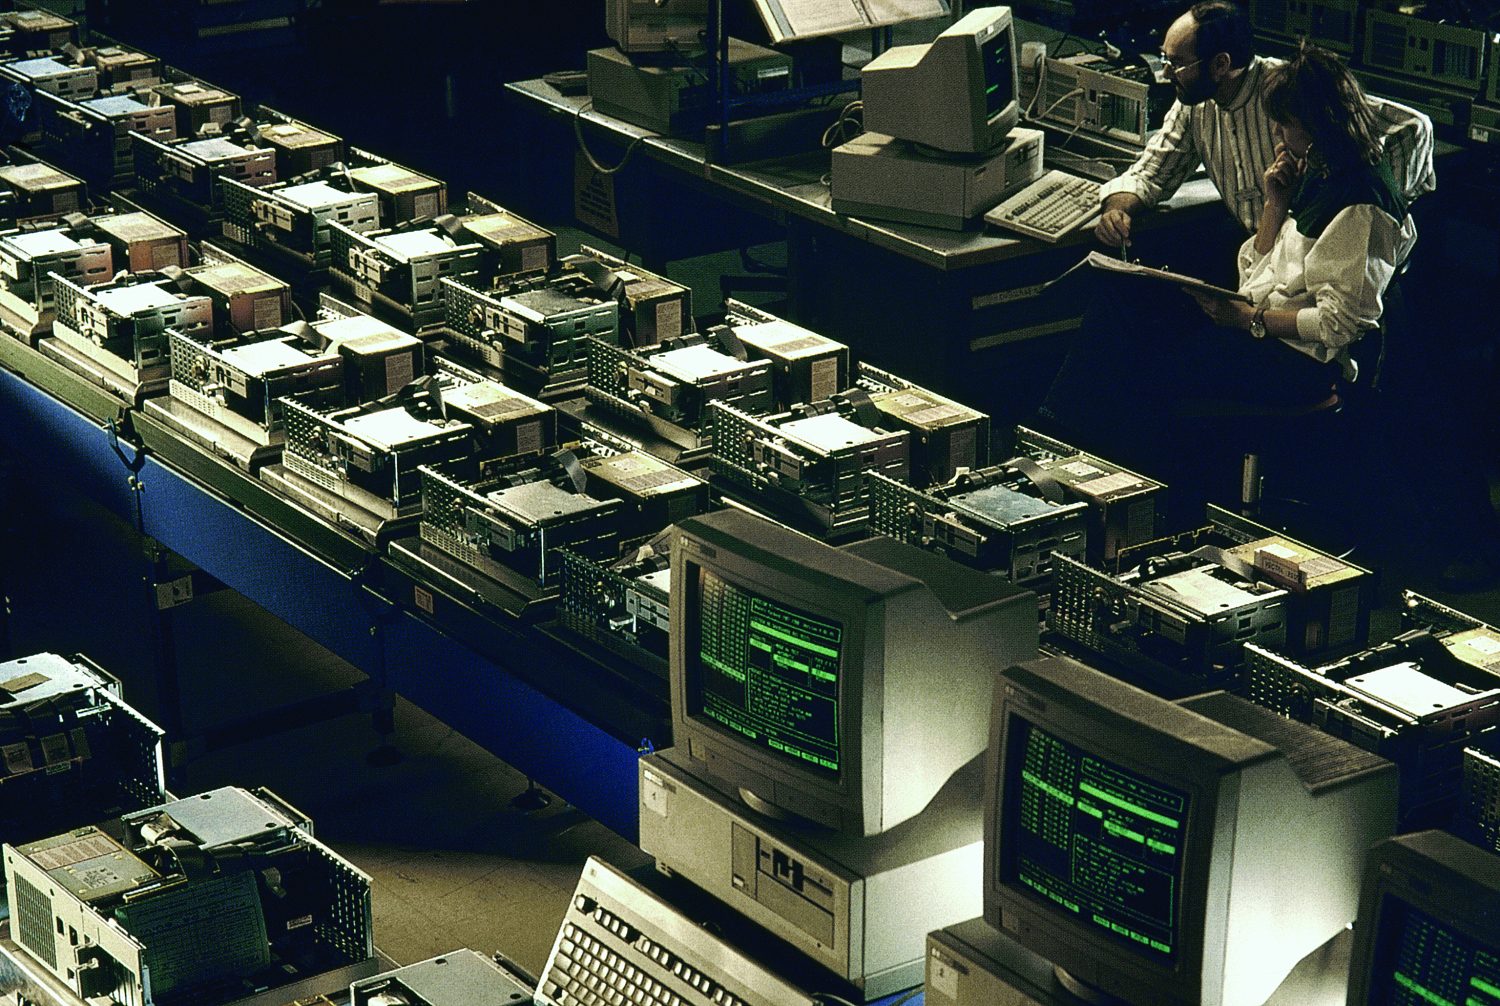 Interior shot of computers in production at Hewlett-Packard's production facility in Grenoble, France.